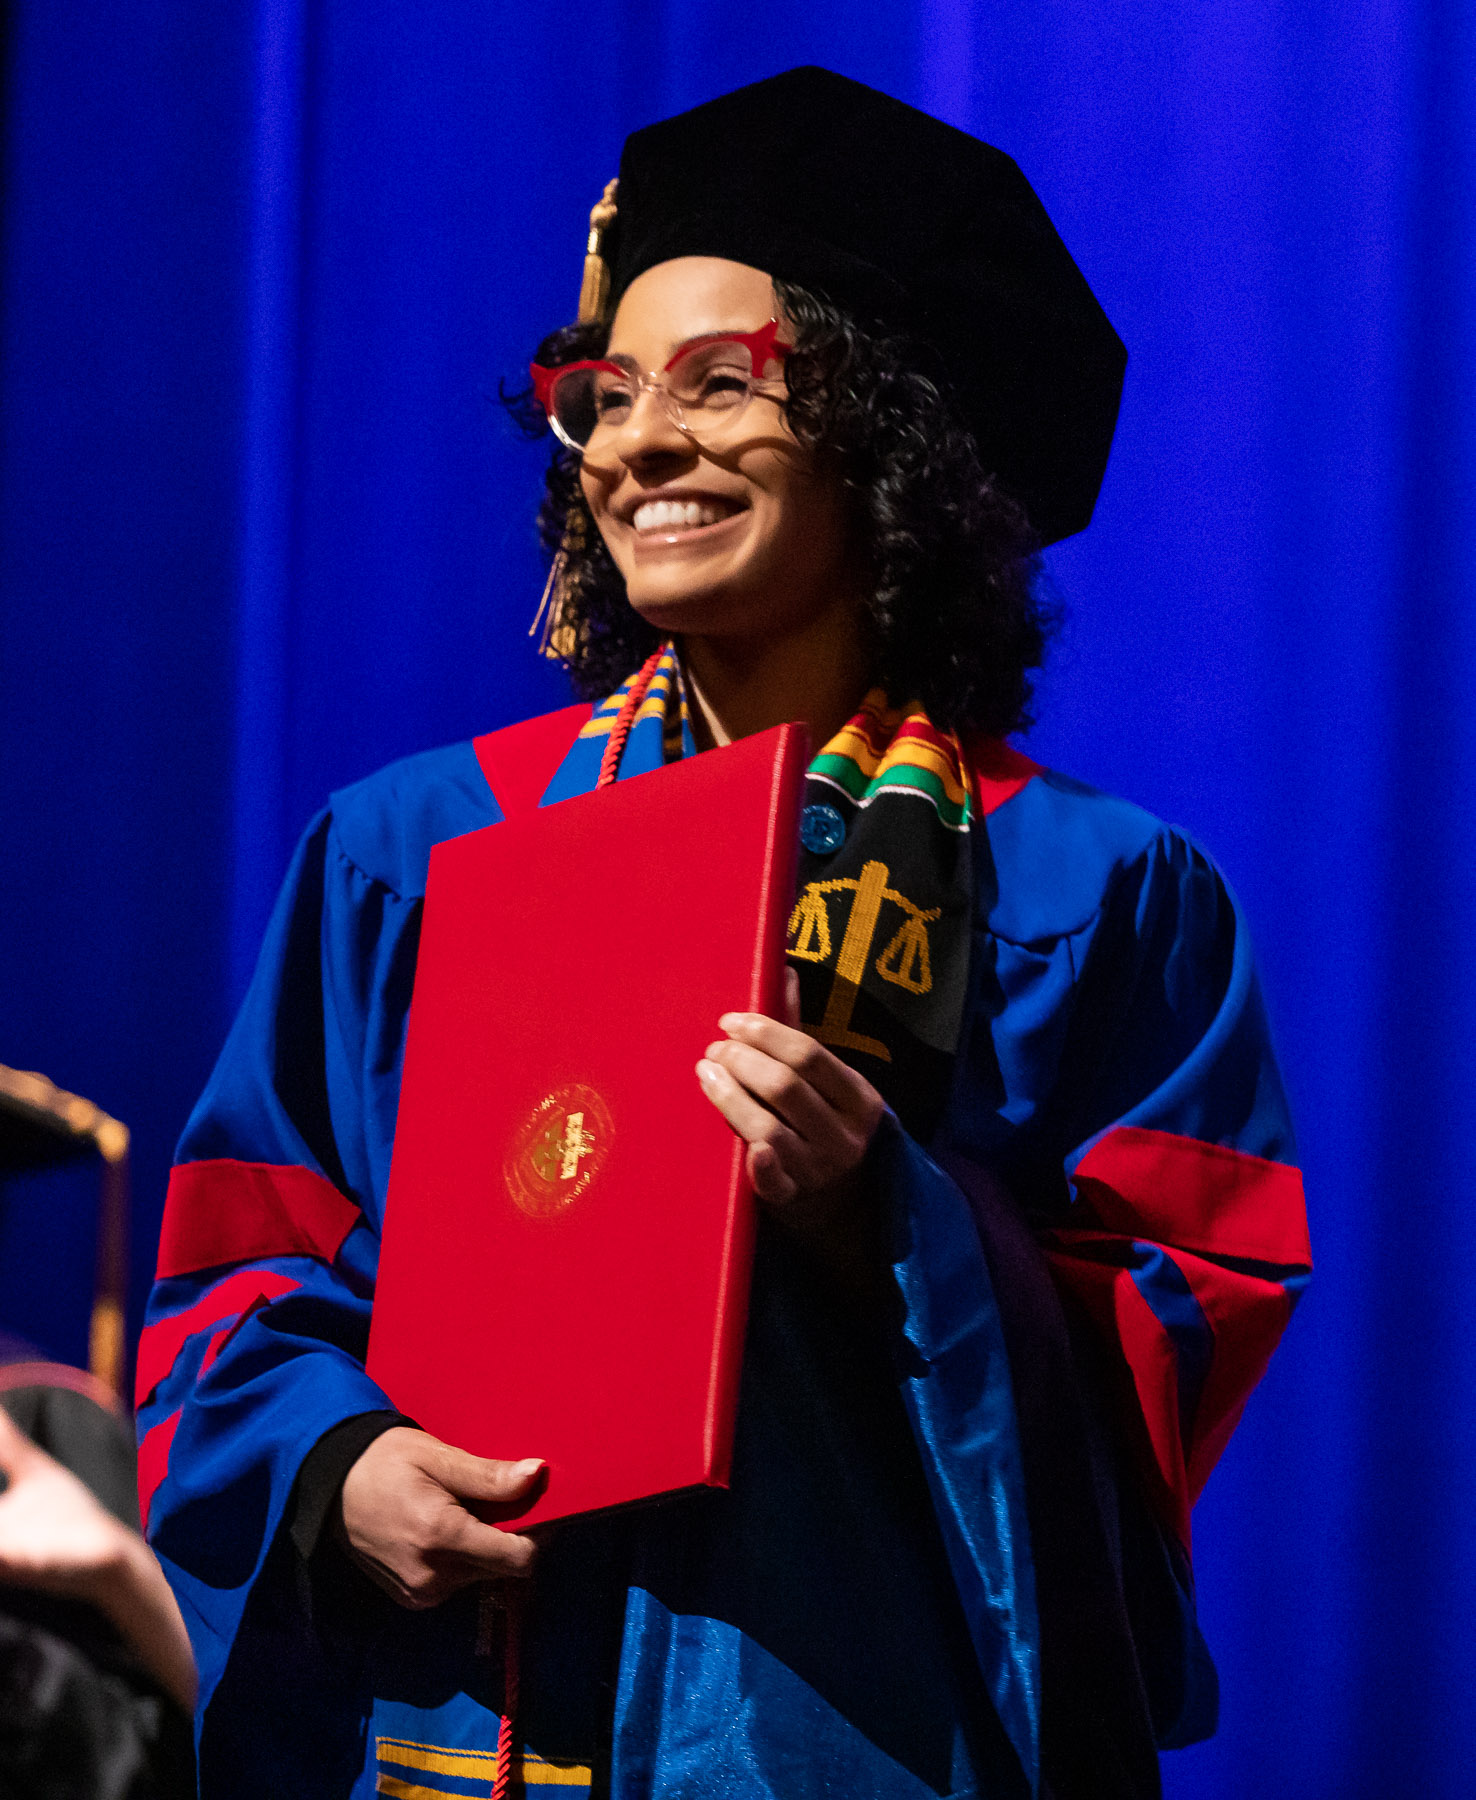 College of Law Commencement May, 2022